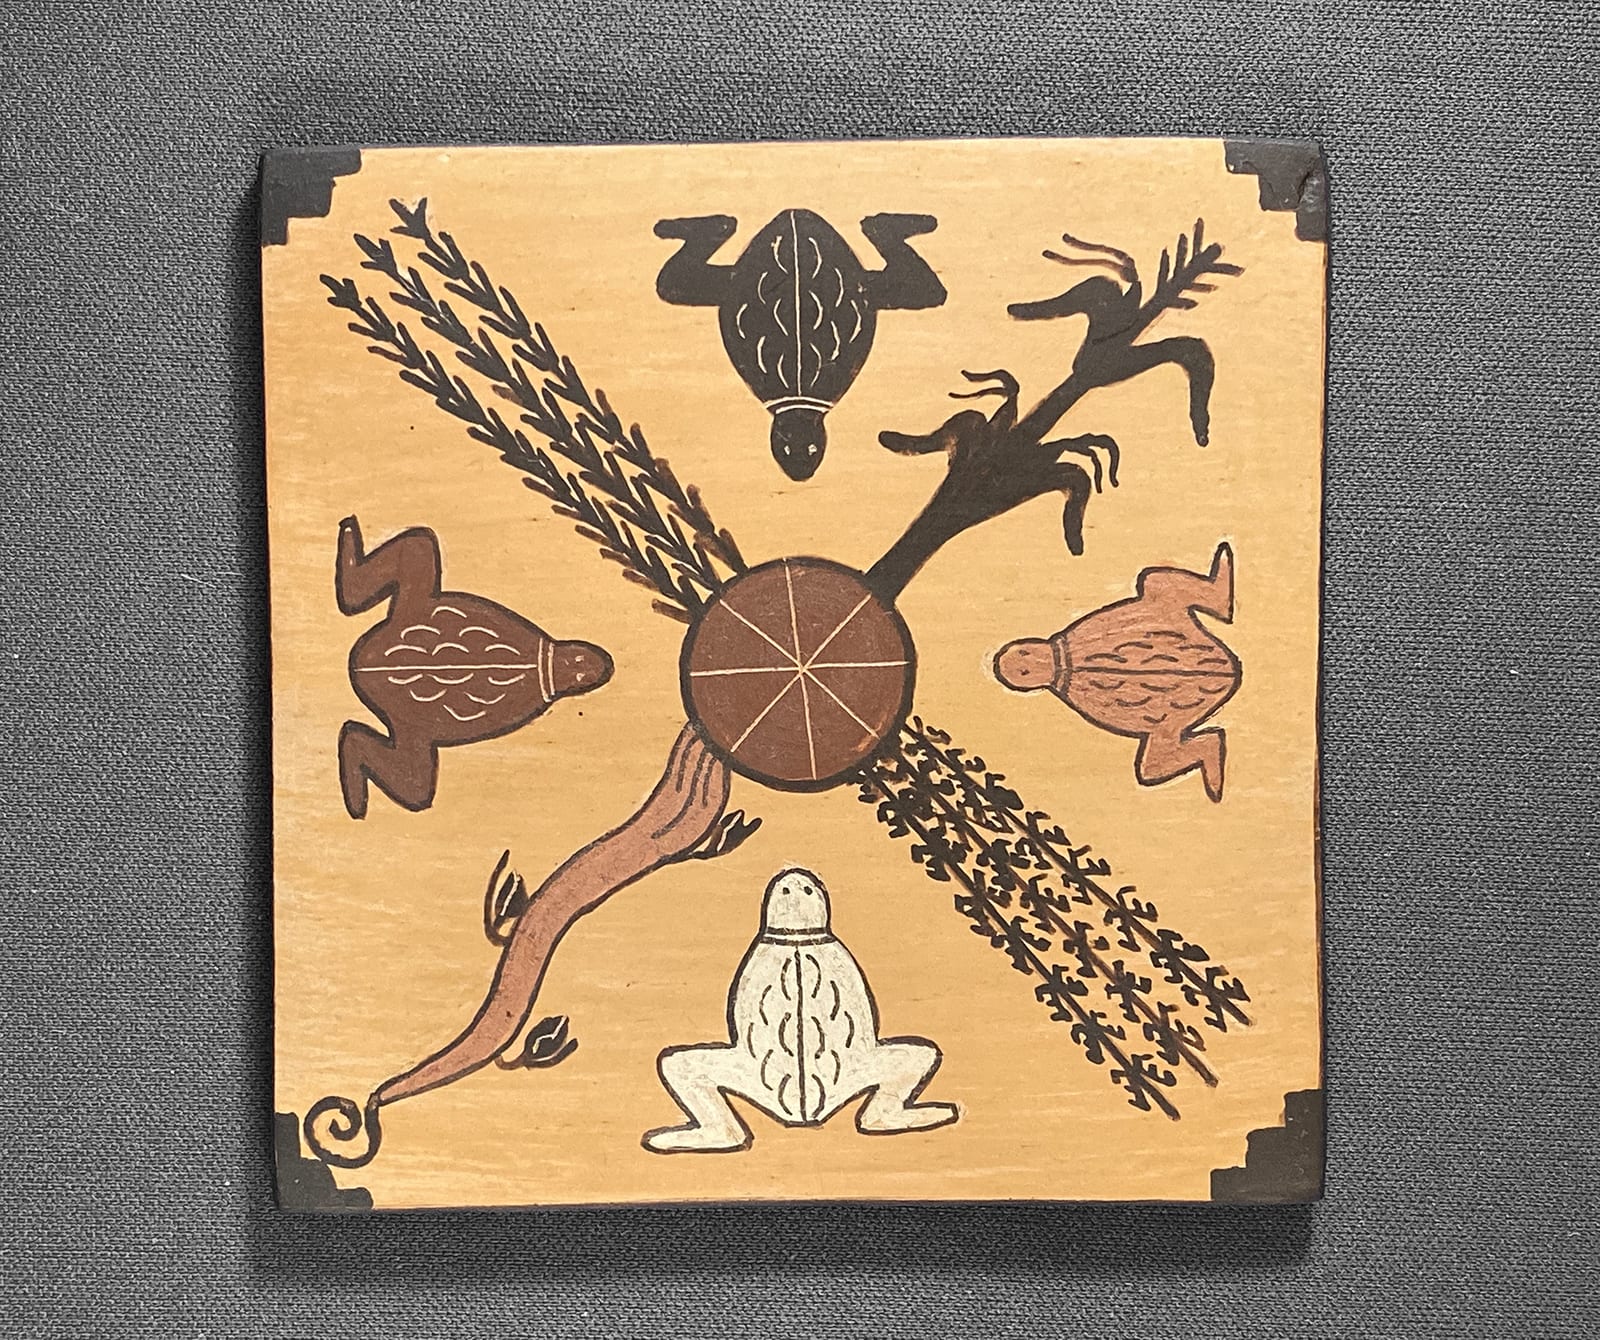 2019-15 Navajo tile of four sacred plants and frogs